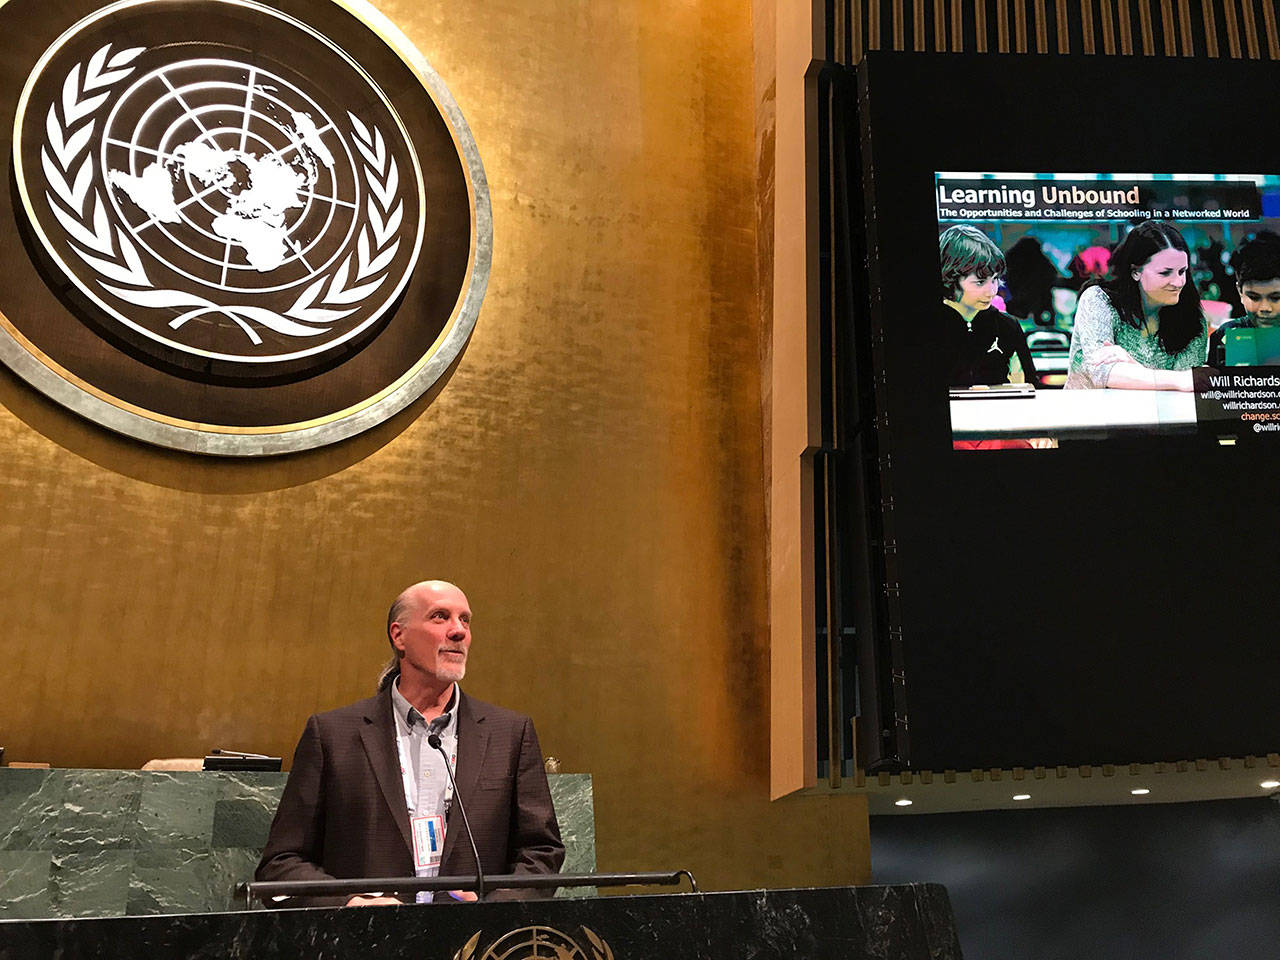 Will Richardson spoke for a group of International School leaders at the United Nations back in January 2018 about the future of education and learning. Contributed photo